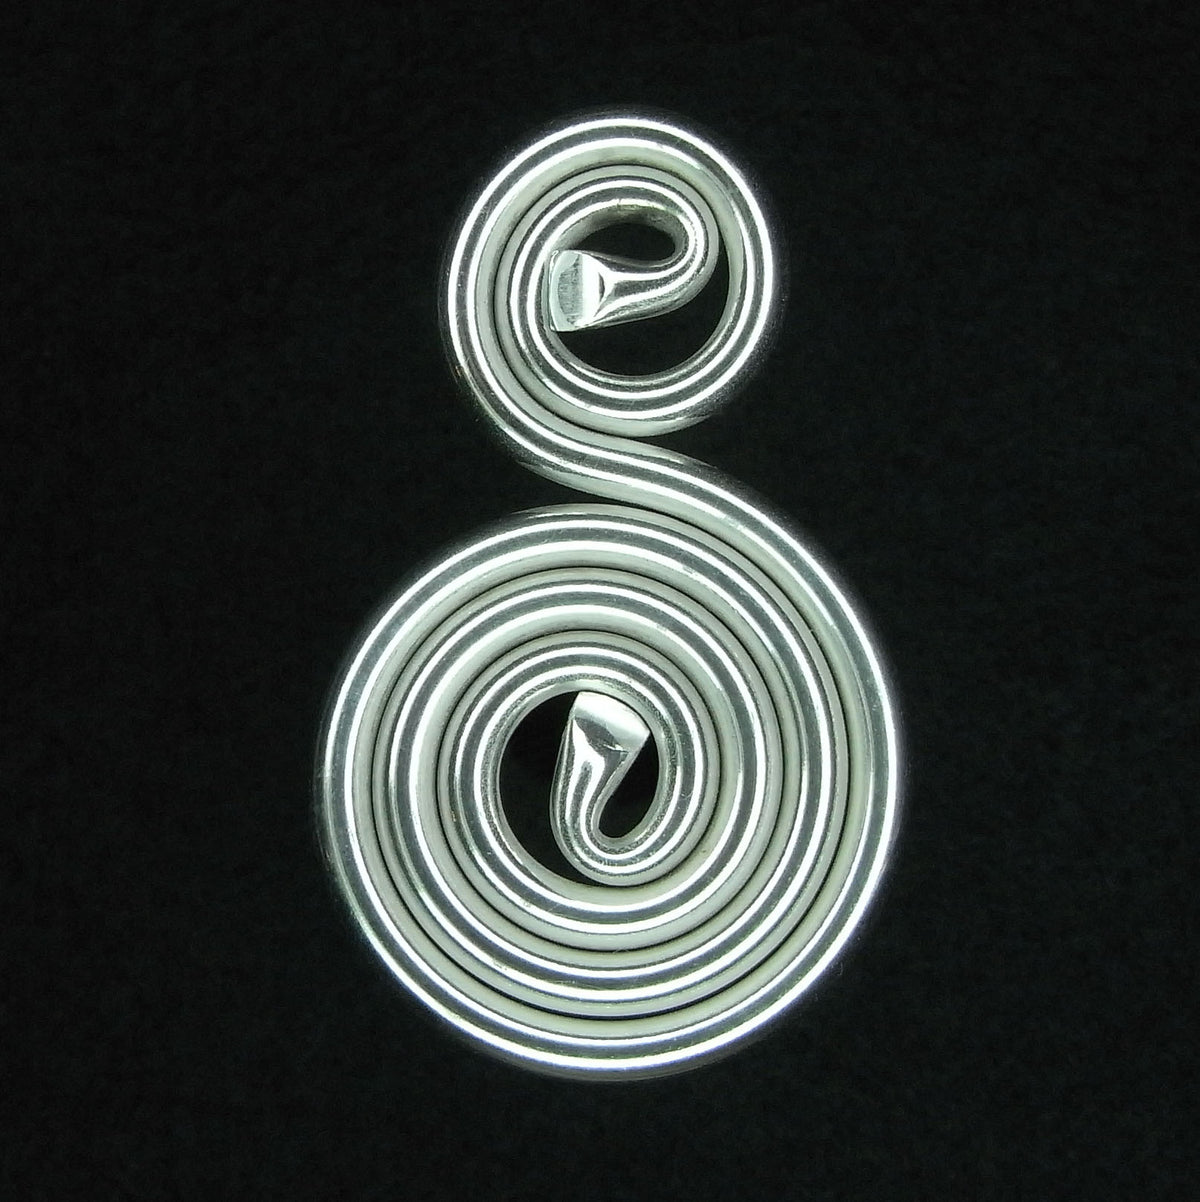 Rhodium Harmoniser | CIR | Raw Living UK | EMF Protection | Centre for Implosion Research (CIR) Phi ‘F’ Personal Harmoniser (Rodium) is a flat spiral form made from copper tubing, filled with CIR imploded water.